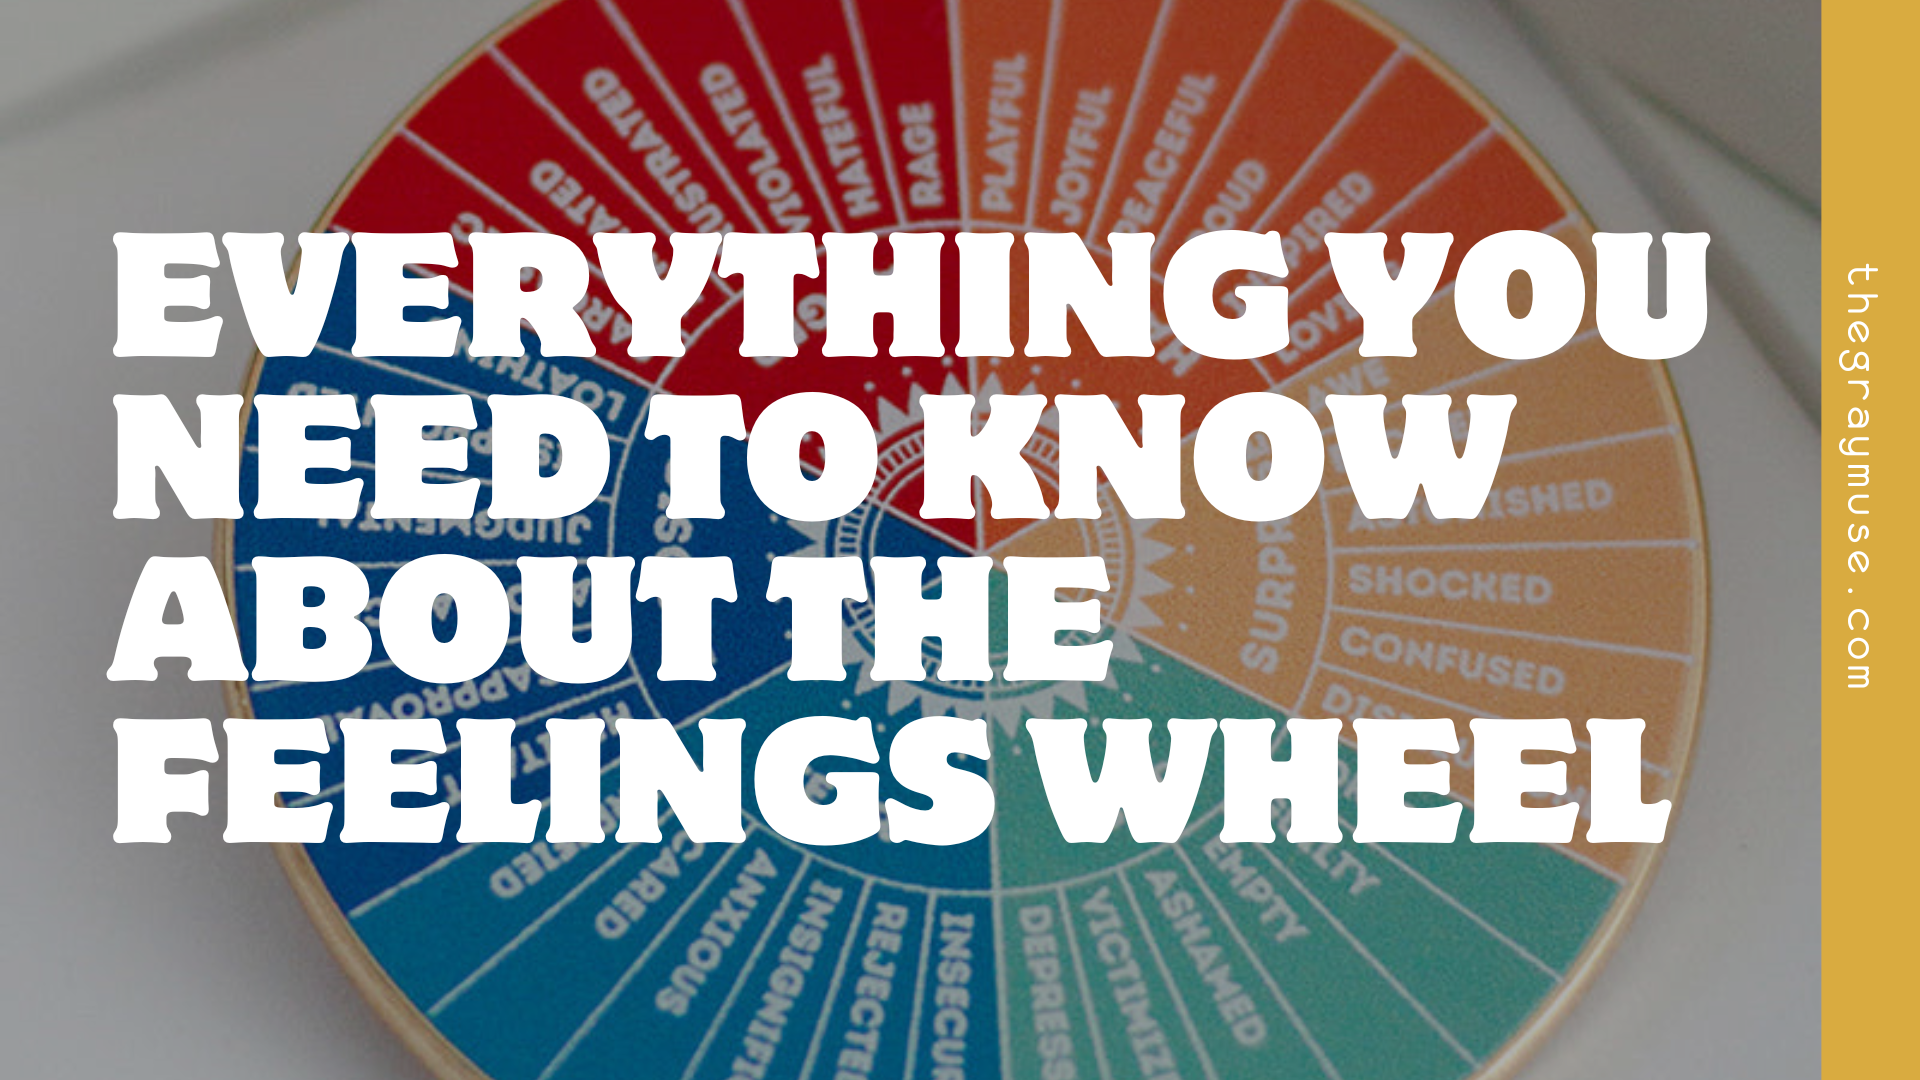 Everything You Need to Know About the Feelings Wheel and How to Use it